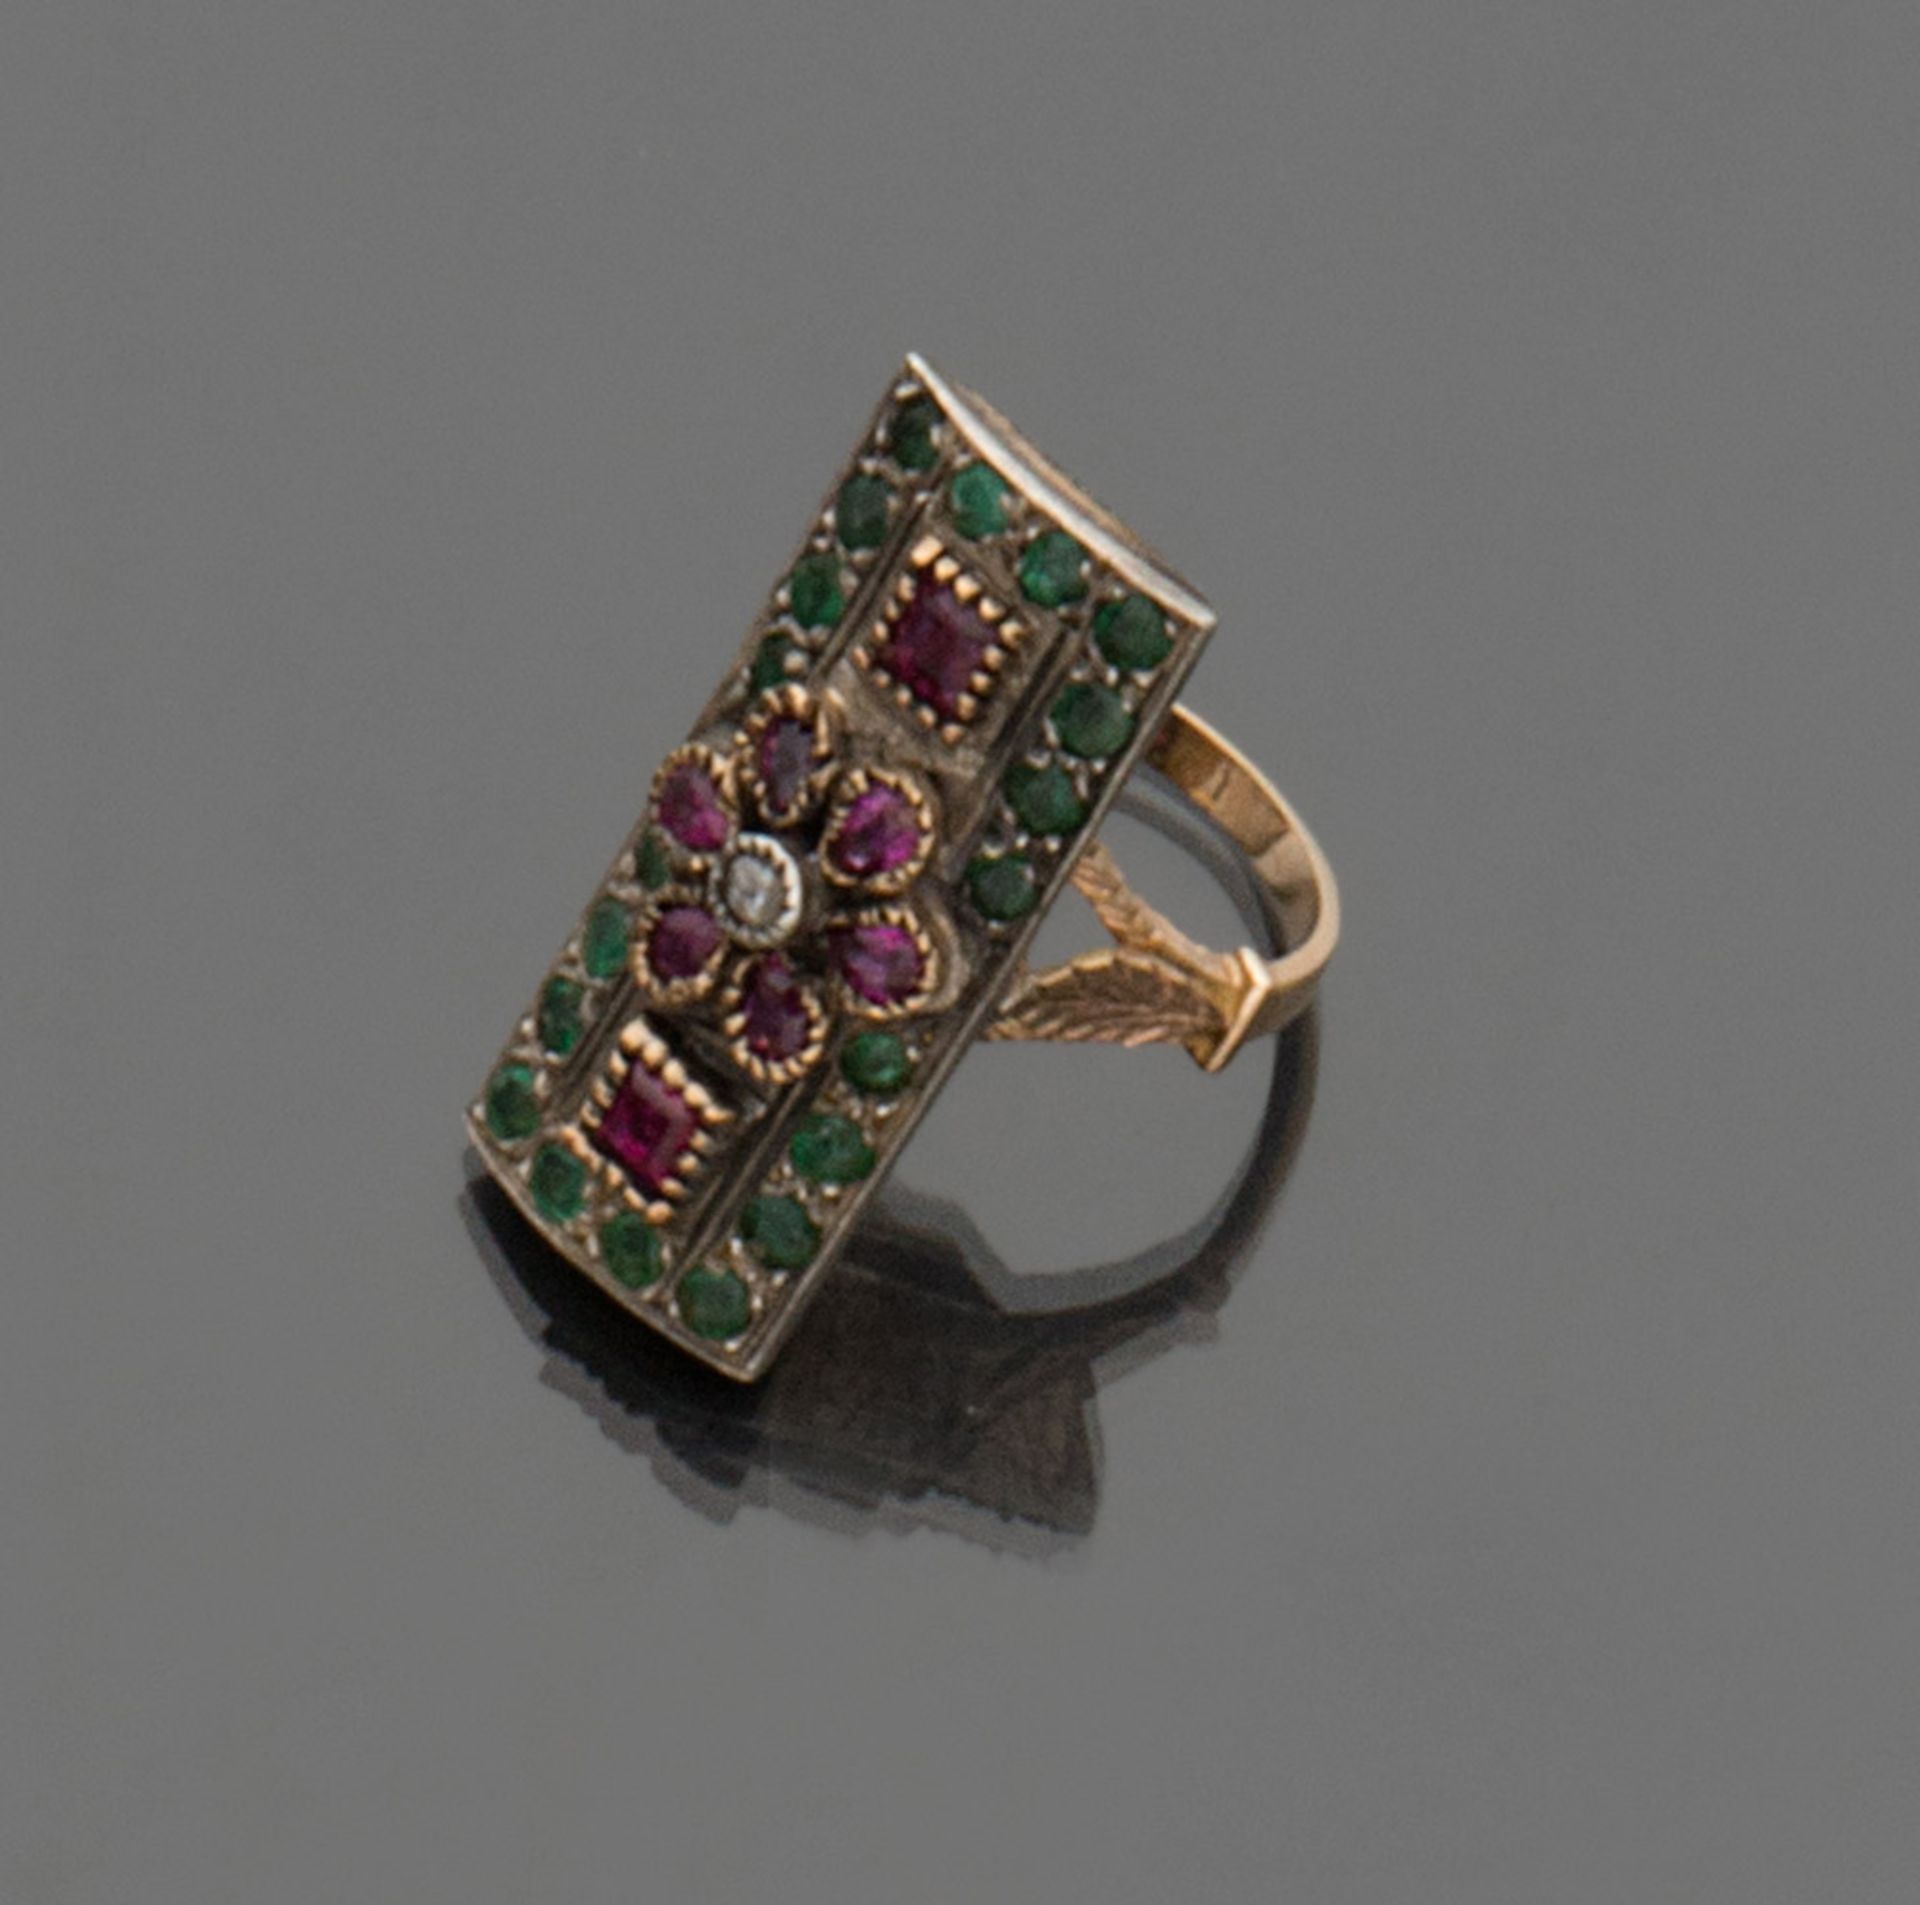 RING in yellow gold 18 kt. and silver, with a rectangular shape with rubies and emeralds embedded.